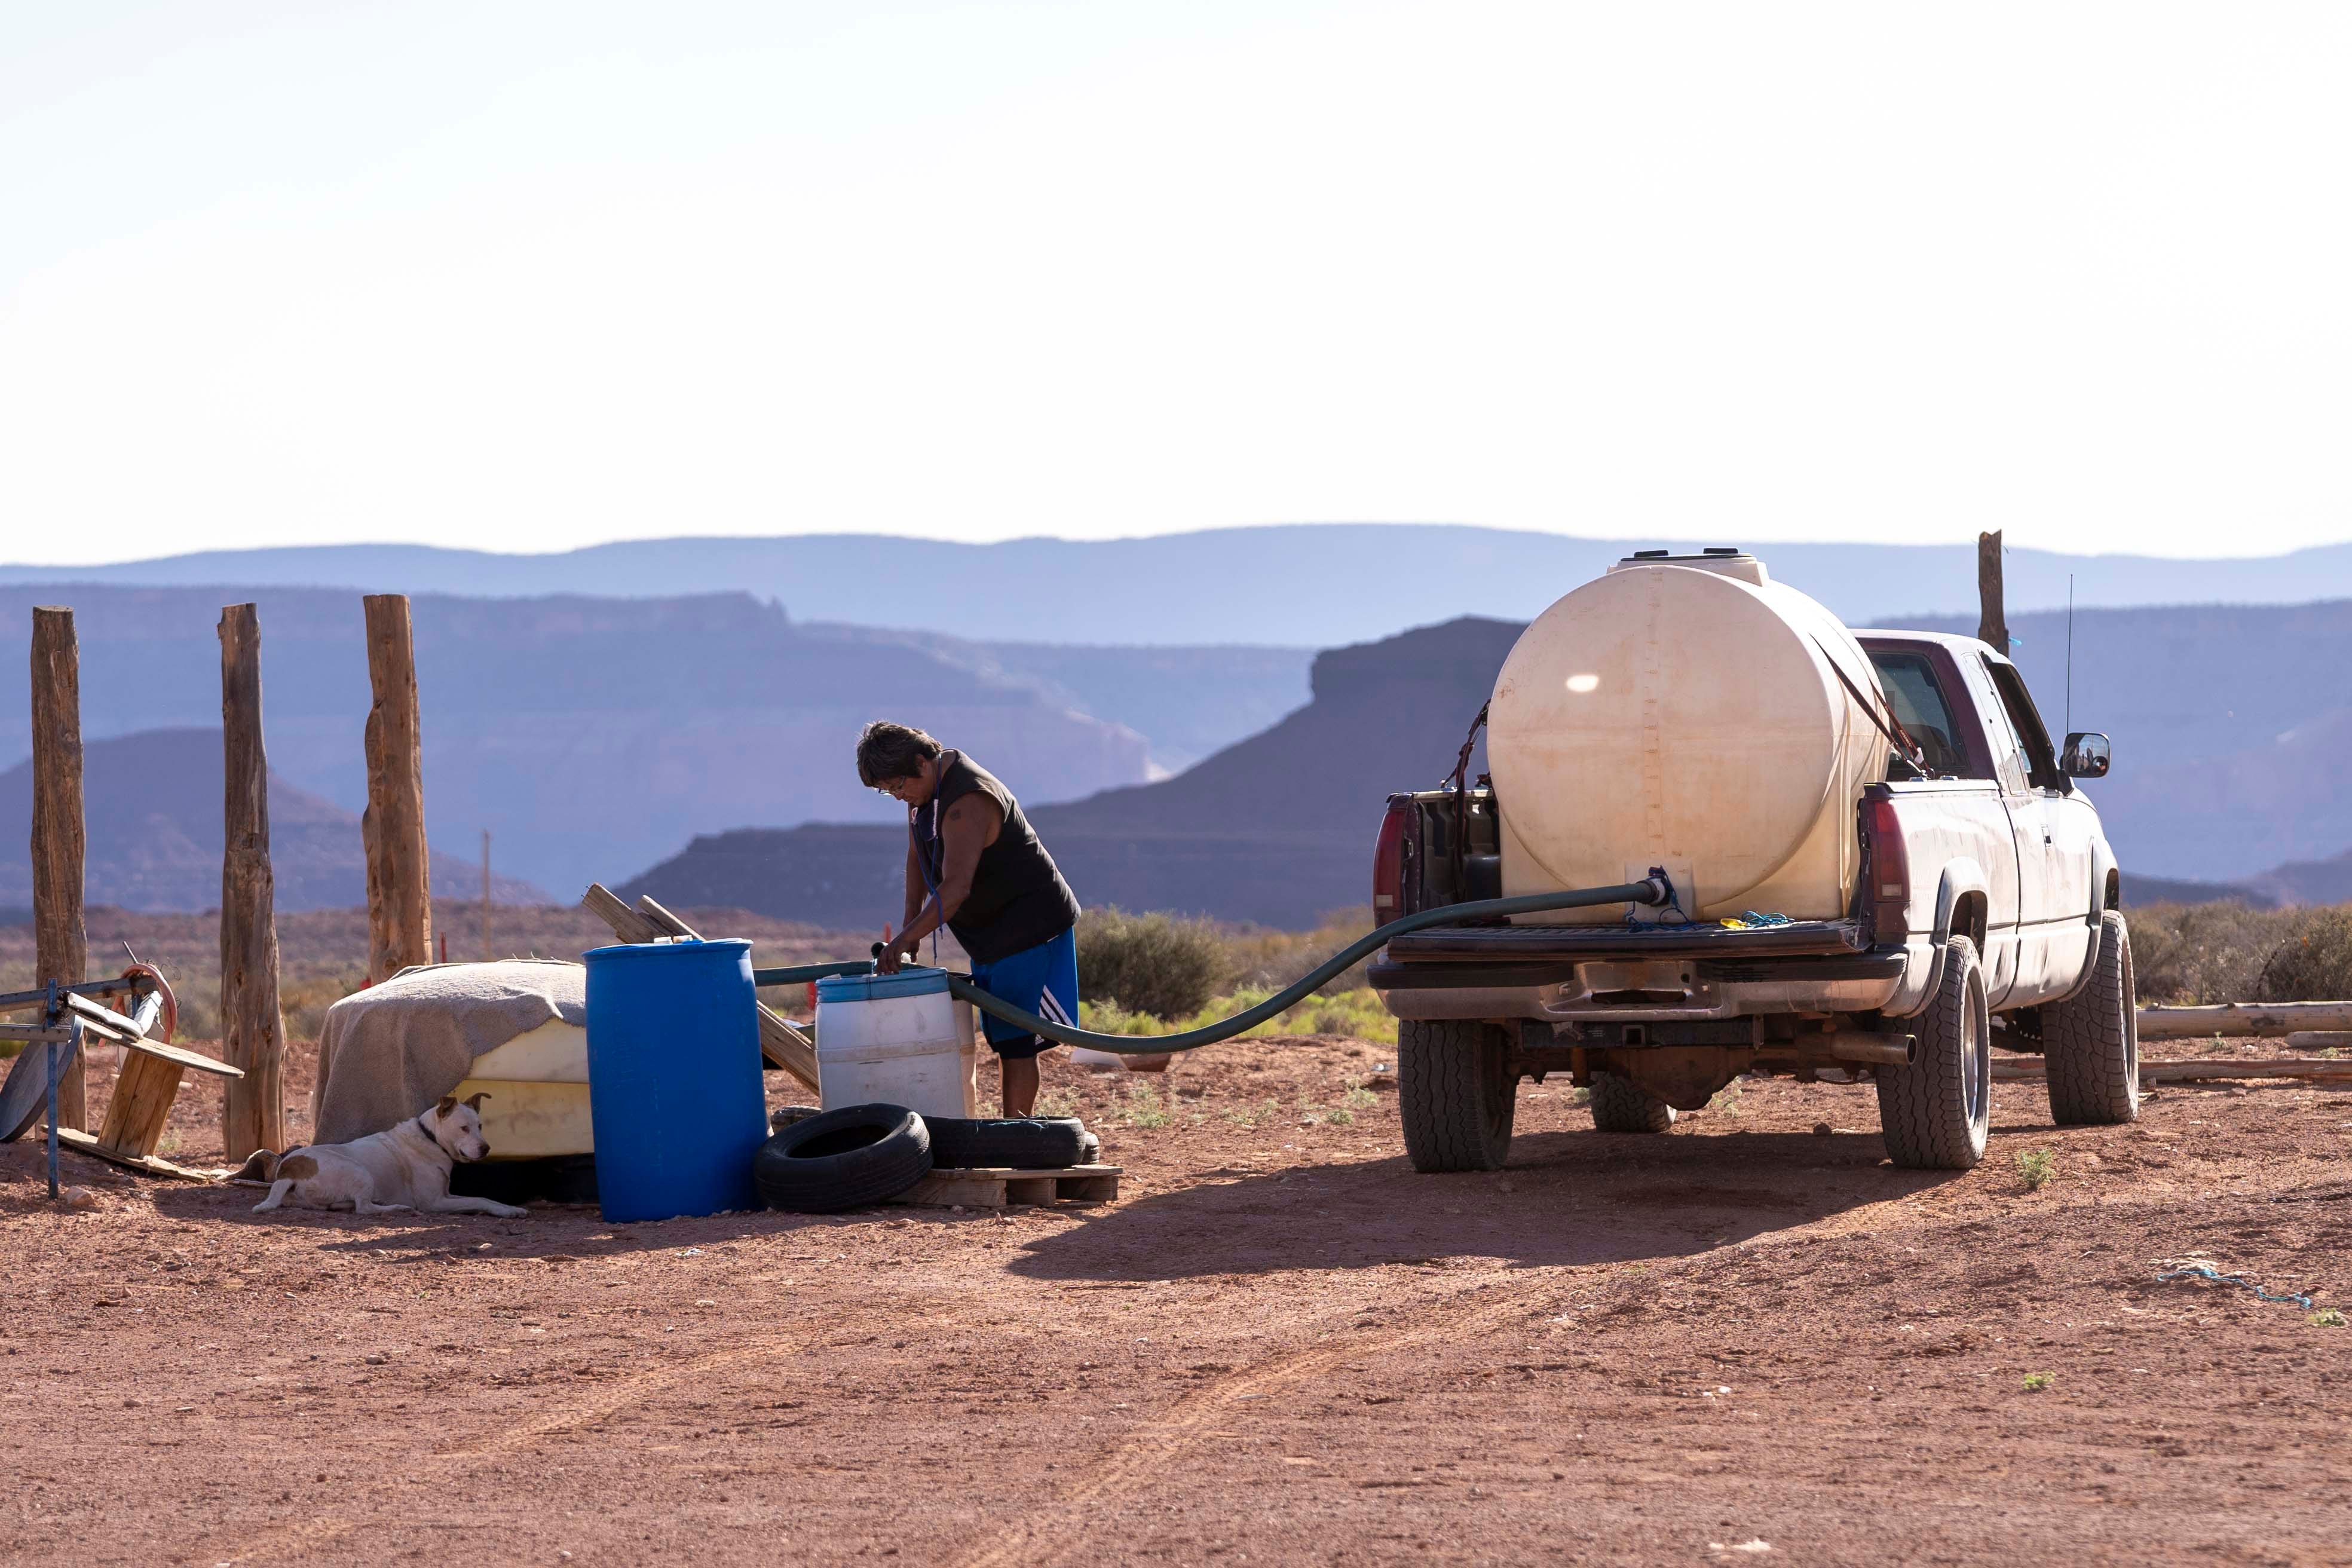 Tommy Rock fills water barrels at his family's home in Oljato, Utah, on the Navajo Nation. Rock is a researcher who specializes in studying environmental contamination and public health.